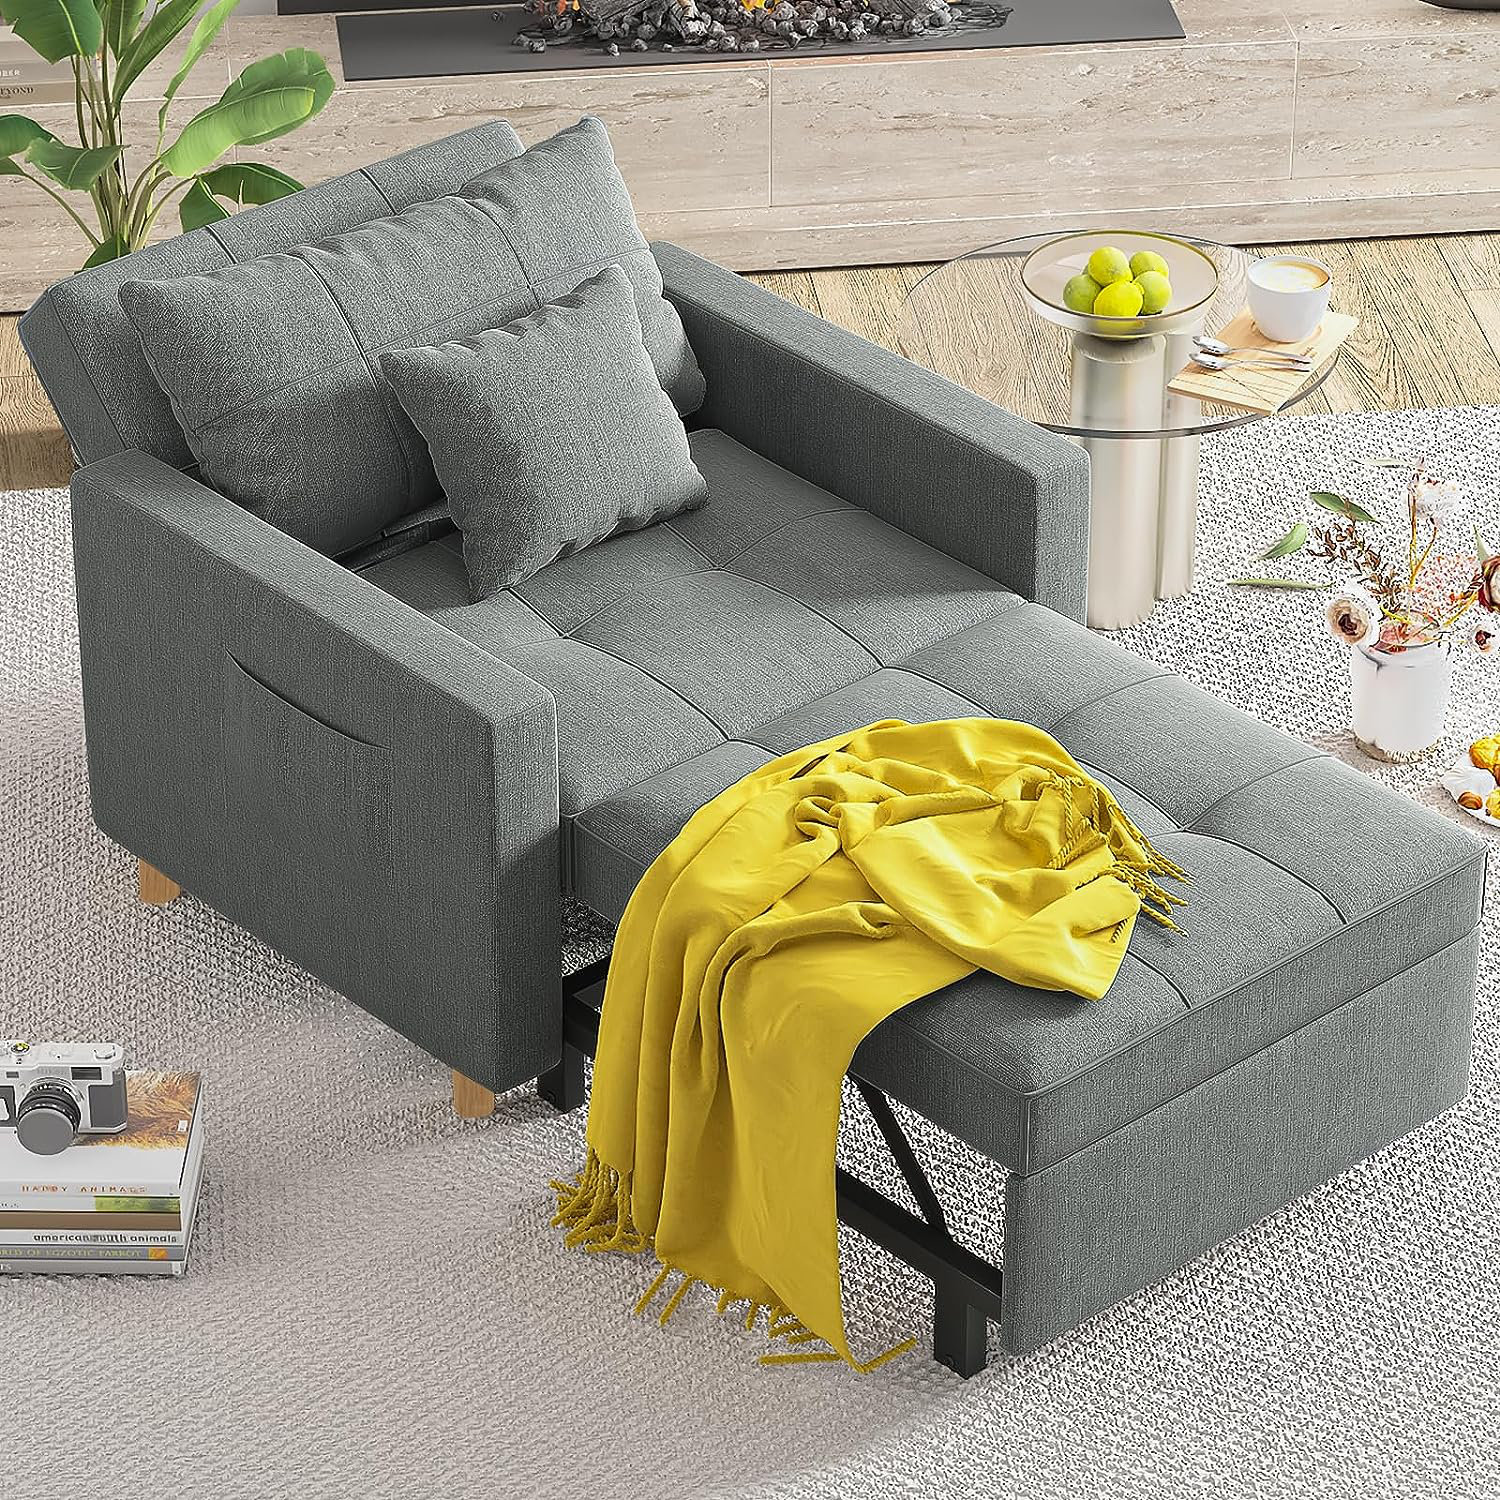 Convertible Upholstered Sofa Bed Sleeper Chair - On Sale - Bed